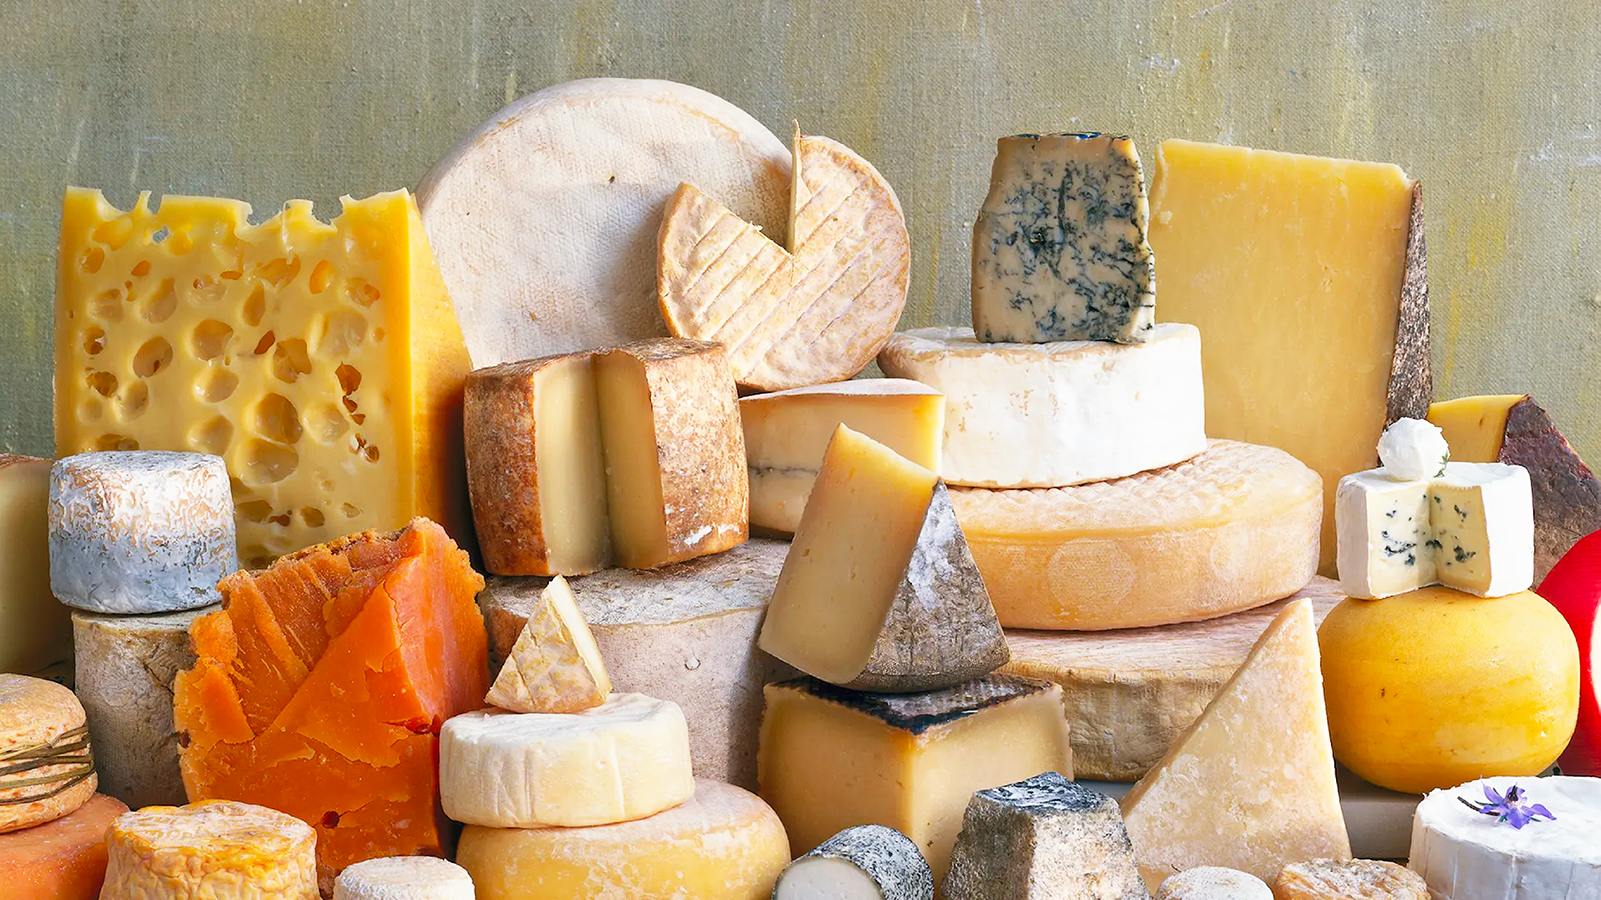 Cheese makers innovate as market impacted by consumer taste changes amid Covid-19 pandemic